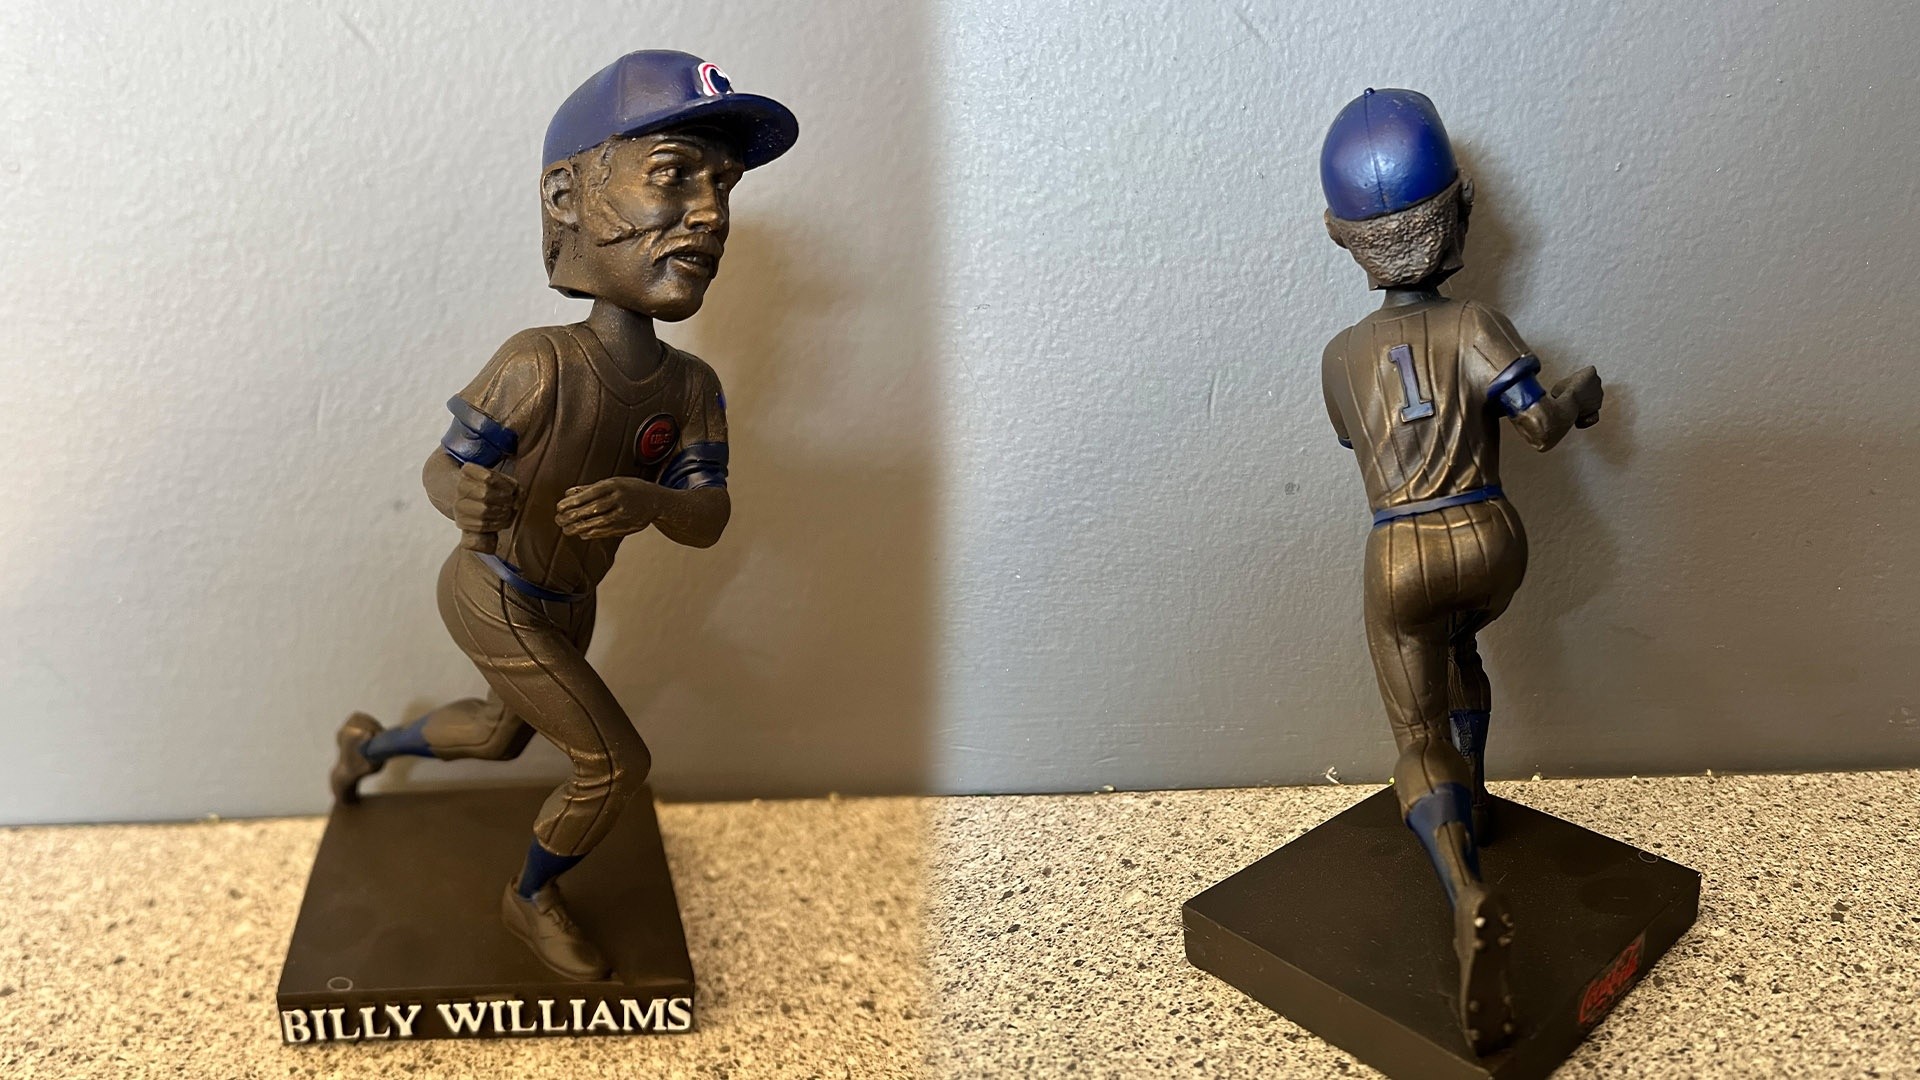 Cubs hand out Billy Williams bobblehead with incorrect number